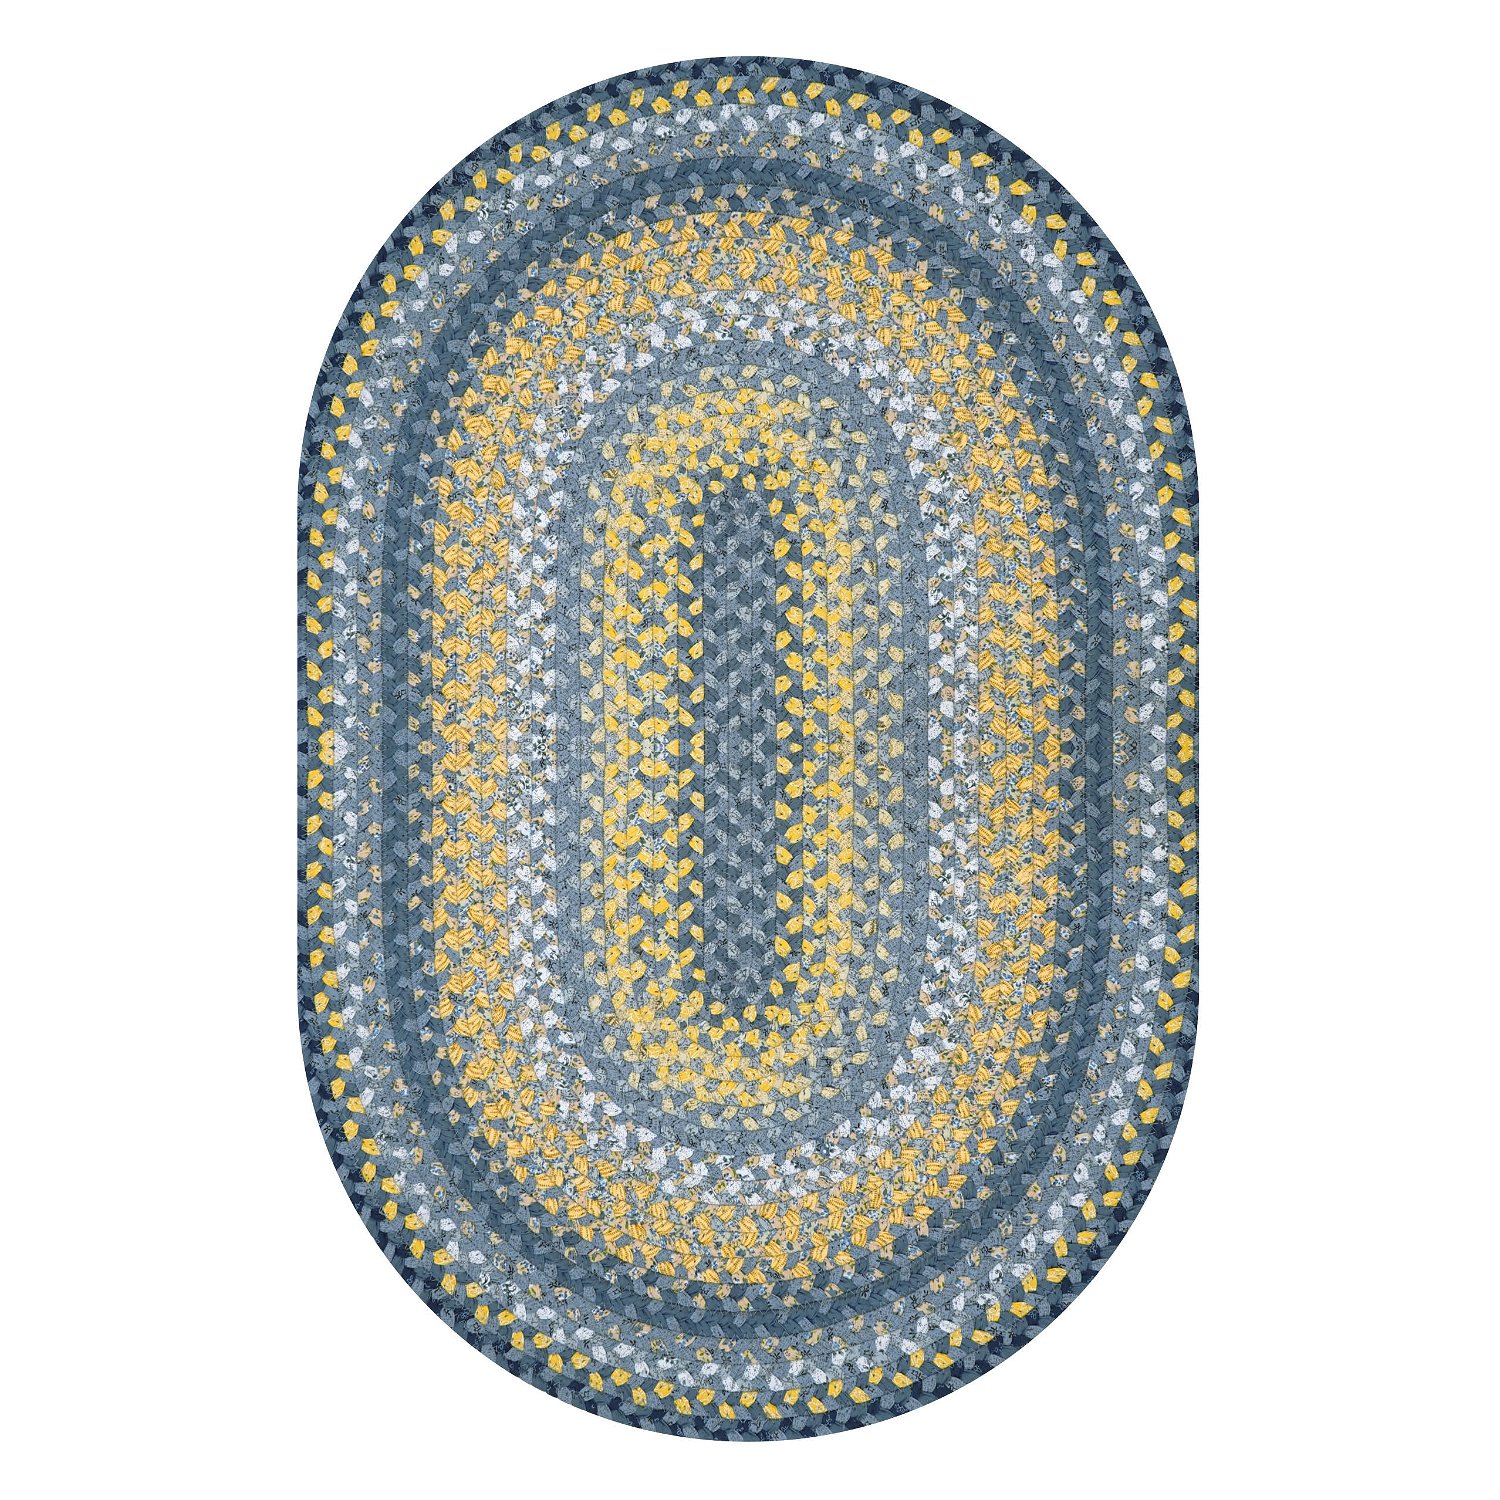 blue and yellow oval logo